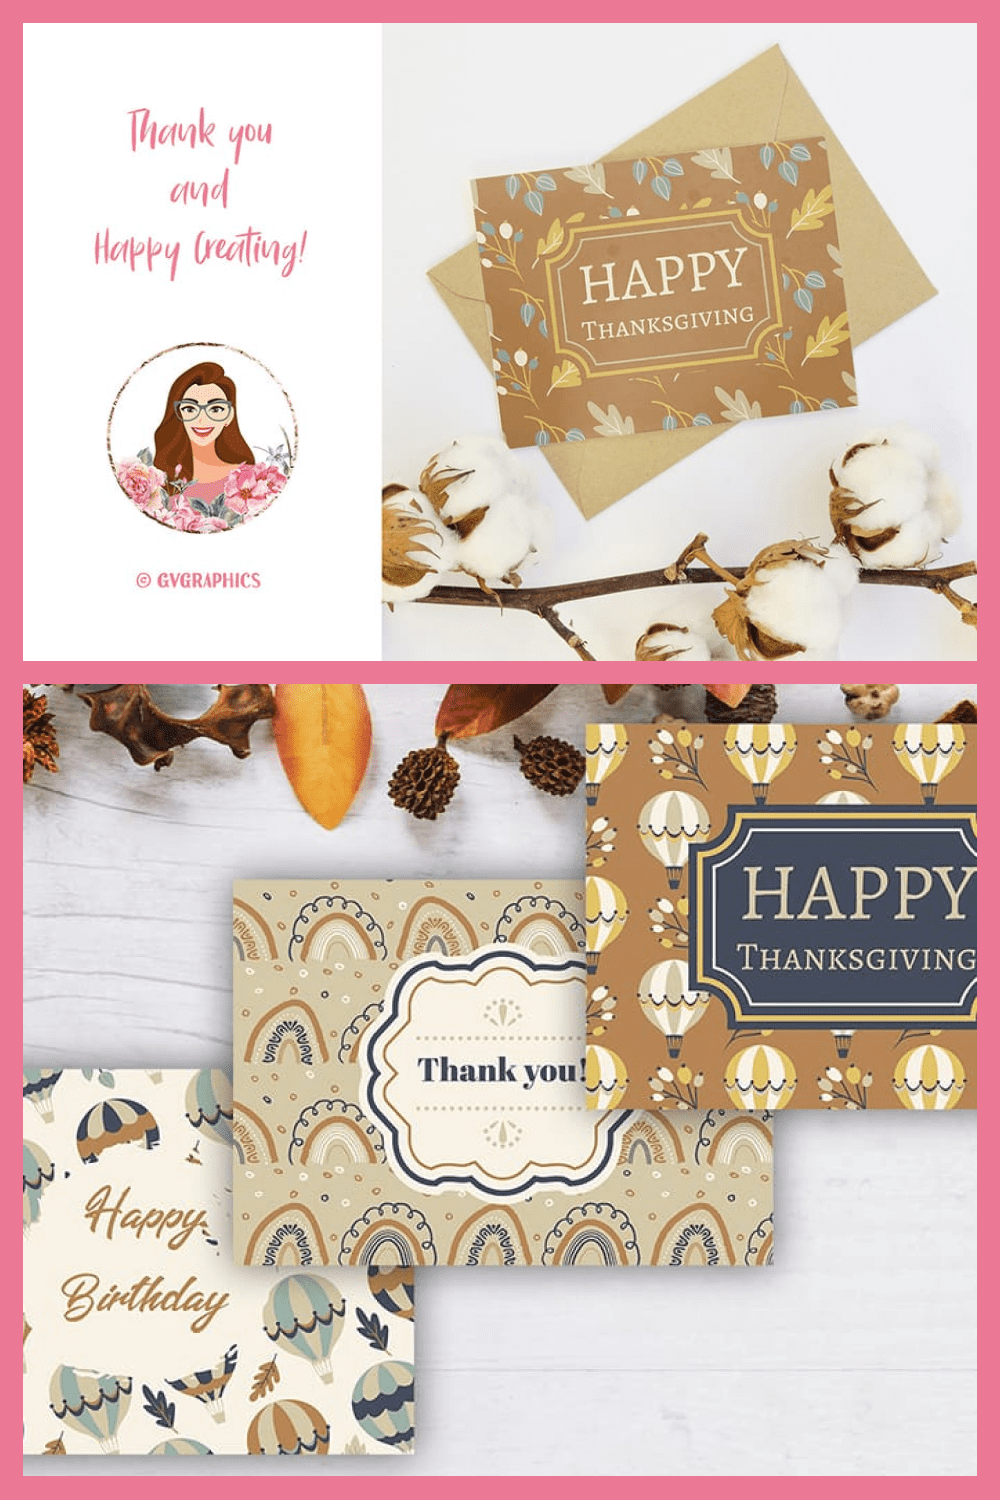 Fall greeting cards: printable thanksgiving, birthday and autumn cards.